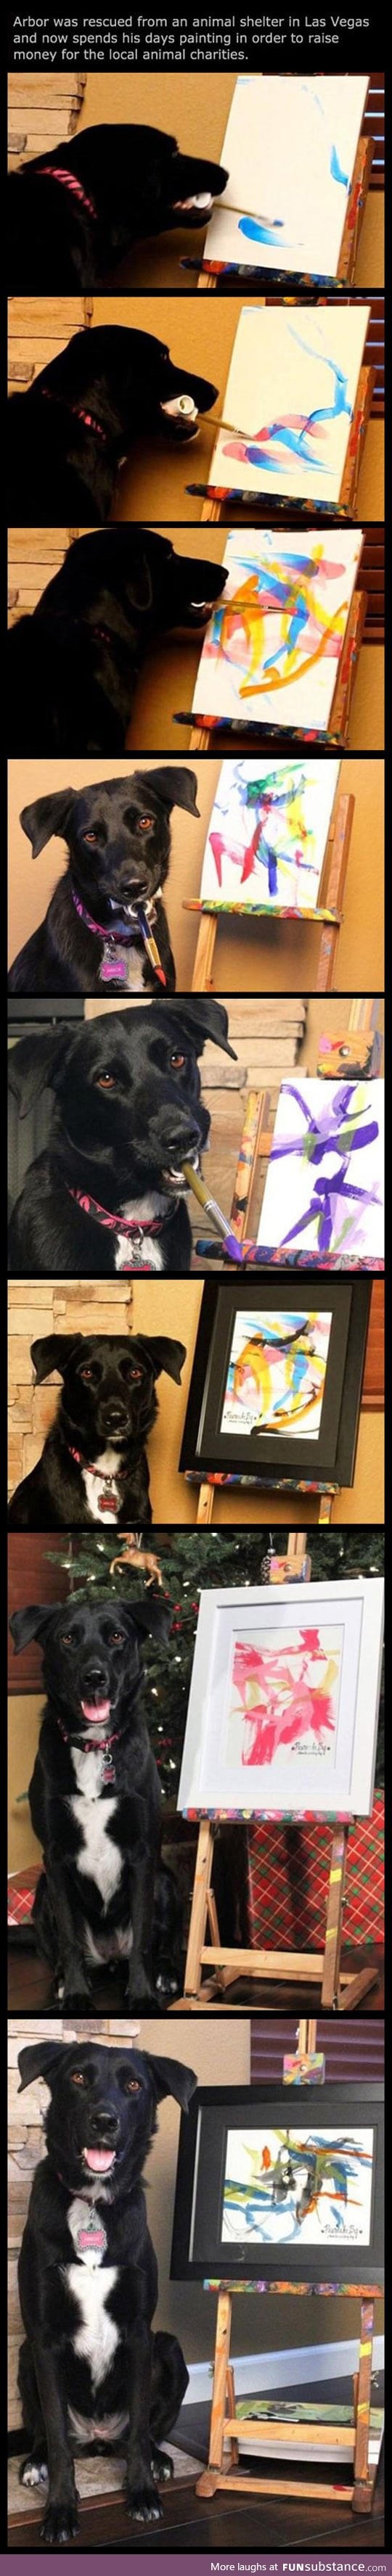 The clever dog that can paint